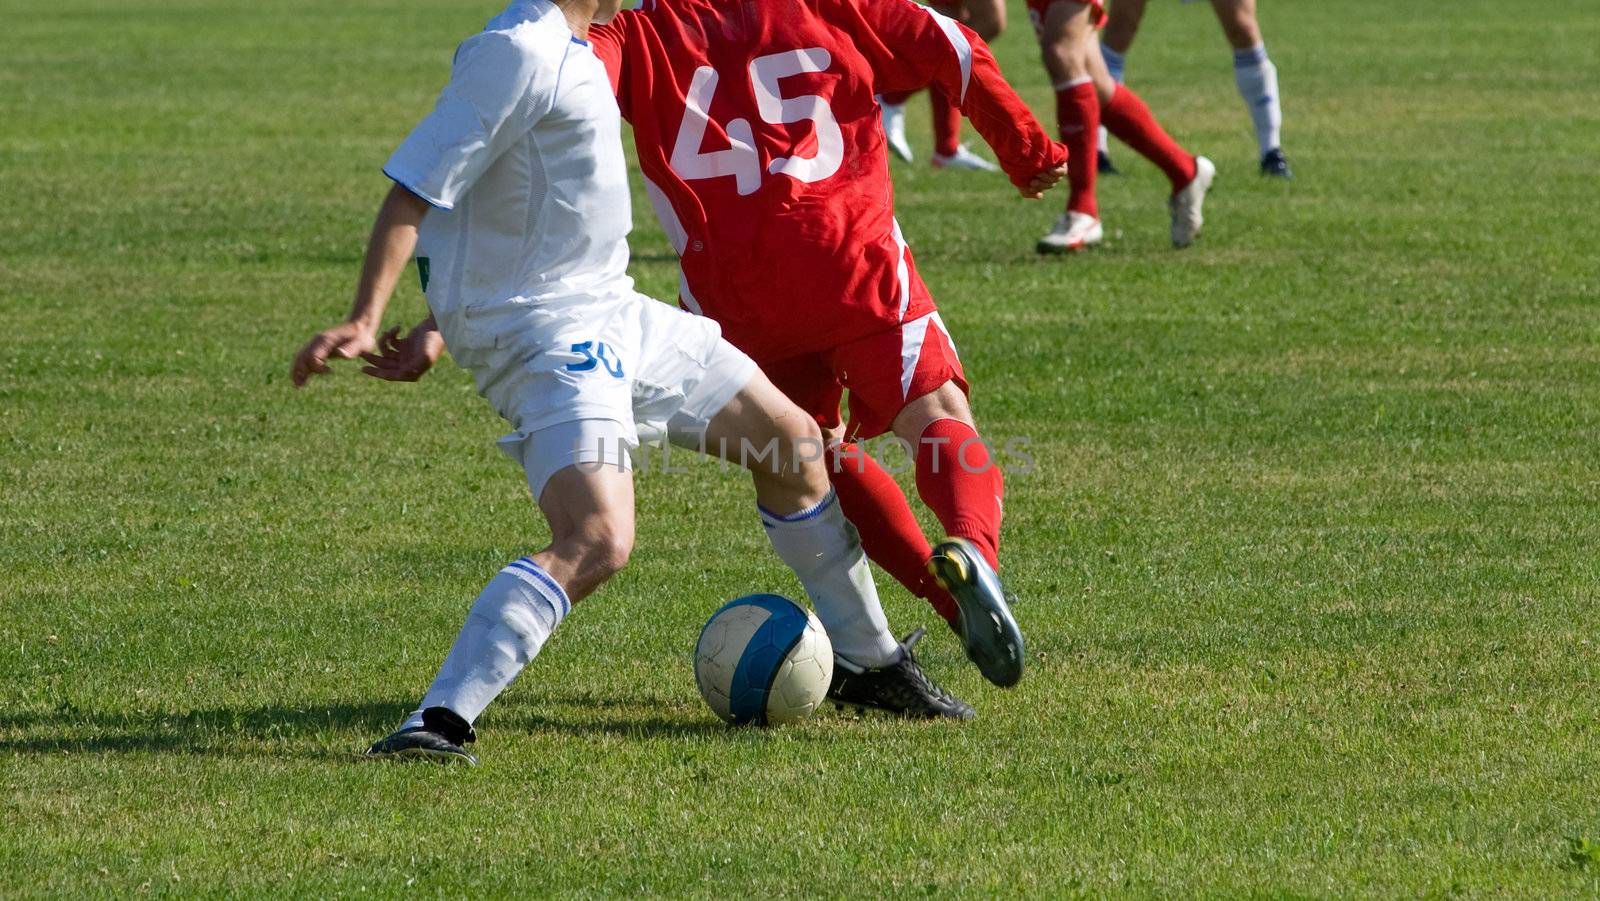 Players in the red and white form play a ball